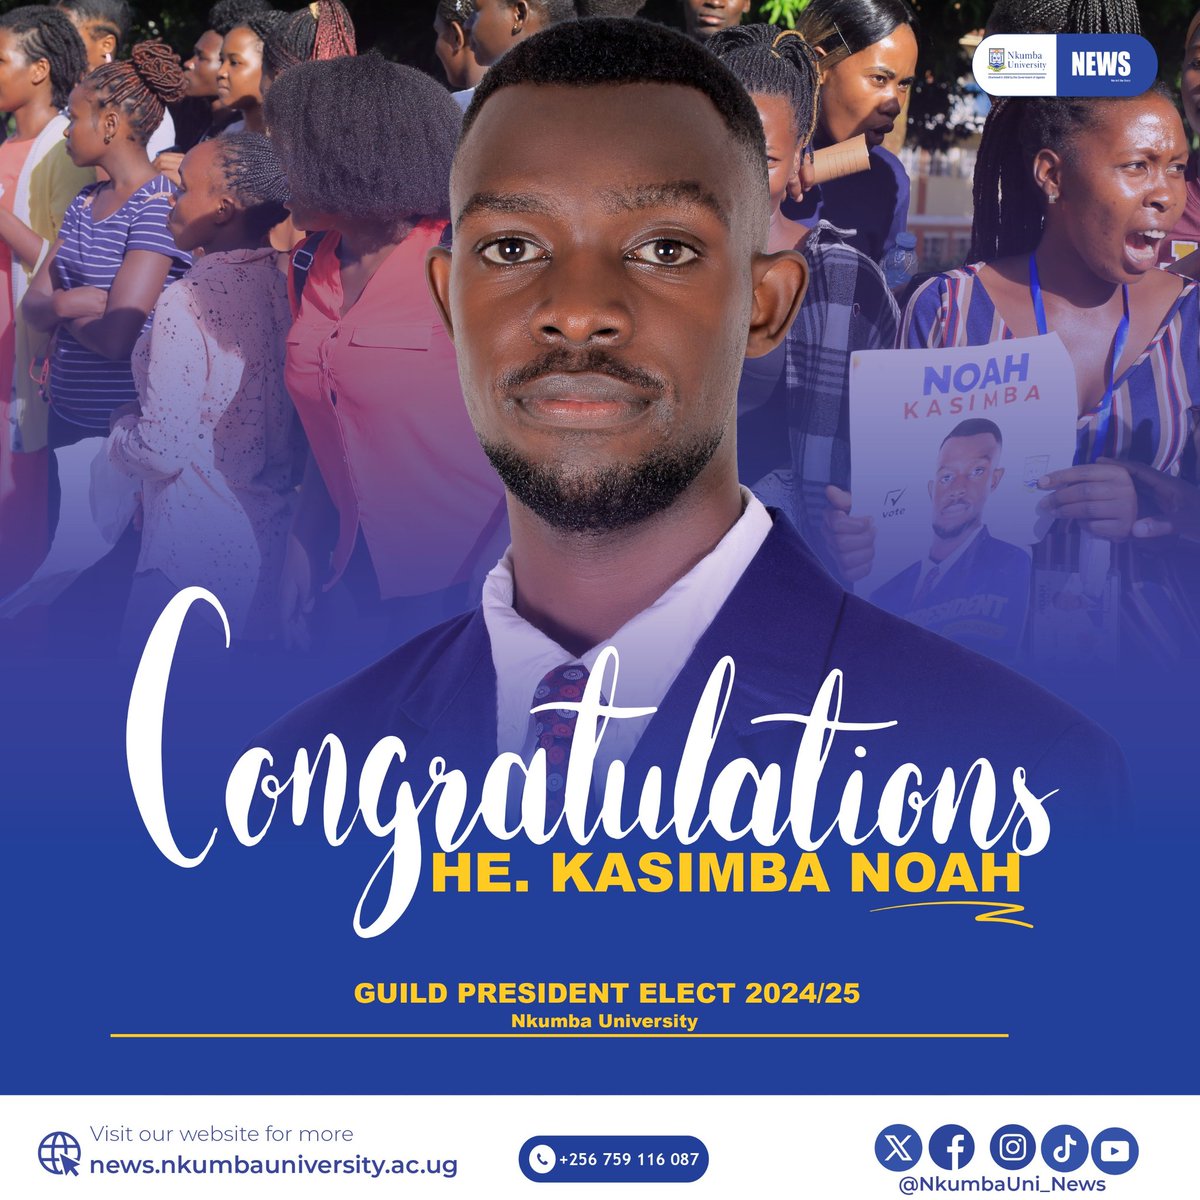 BREAKING NEWS: Kasimba Noah is the Guild President Elect of Nkumba university. Thank you Nkumba students for boarding the ark, it's time to sail. Welcome on board Genesis. 7:7